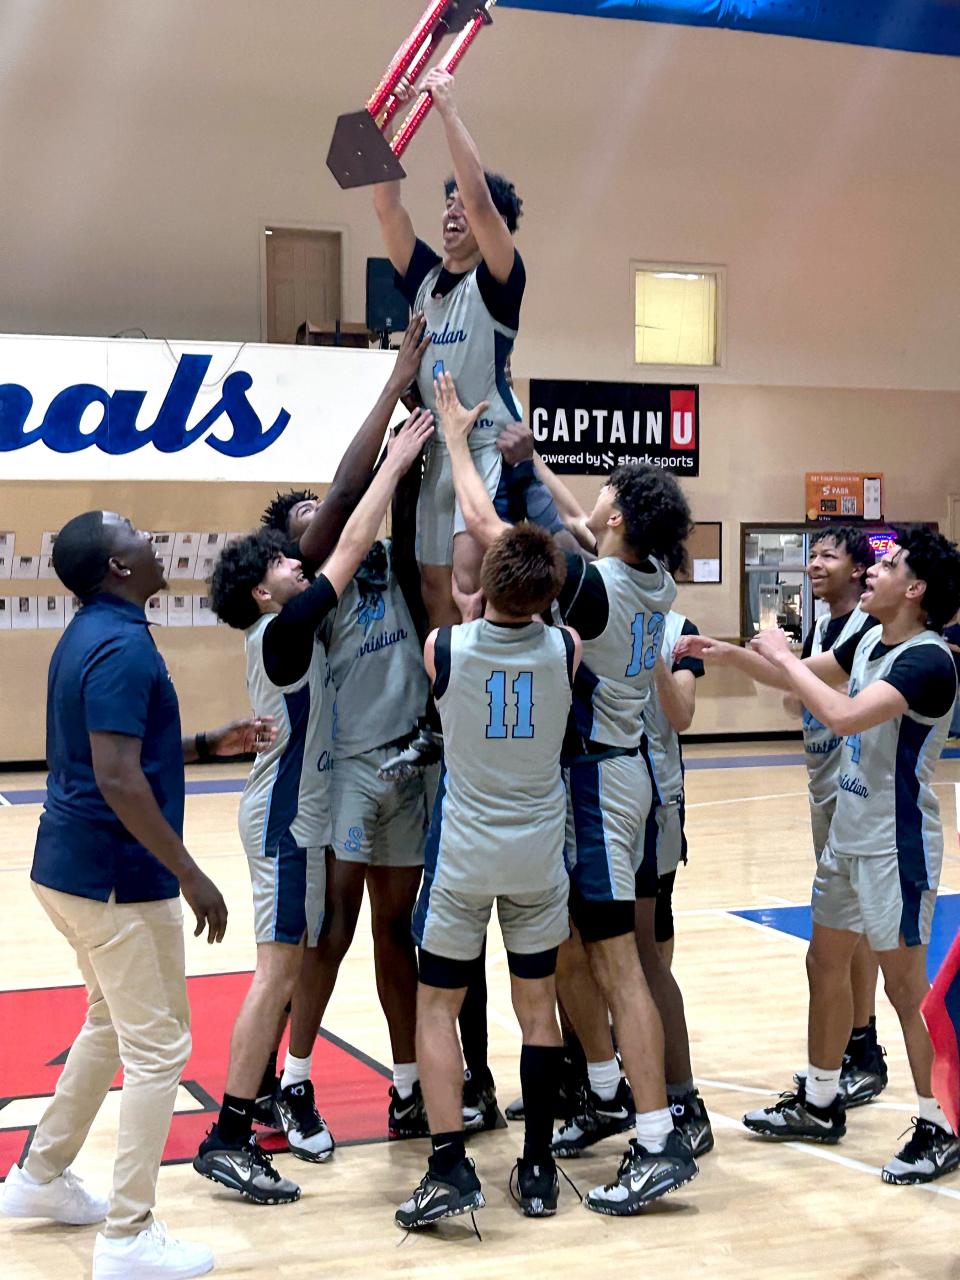 Jordan Christian Prep's Gary Nevarez is lifted in the air with the trophy by his teammates as they celebration winning the NACA Division 5 national tournament.